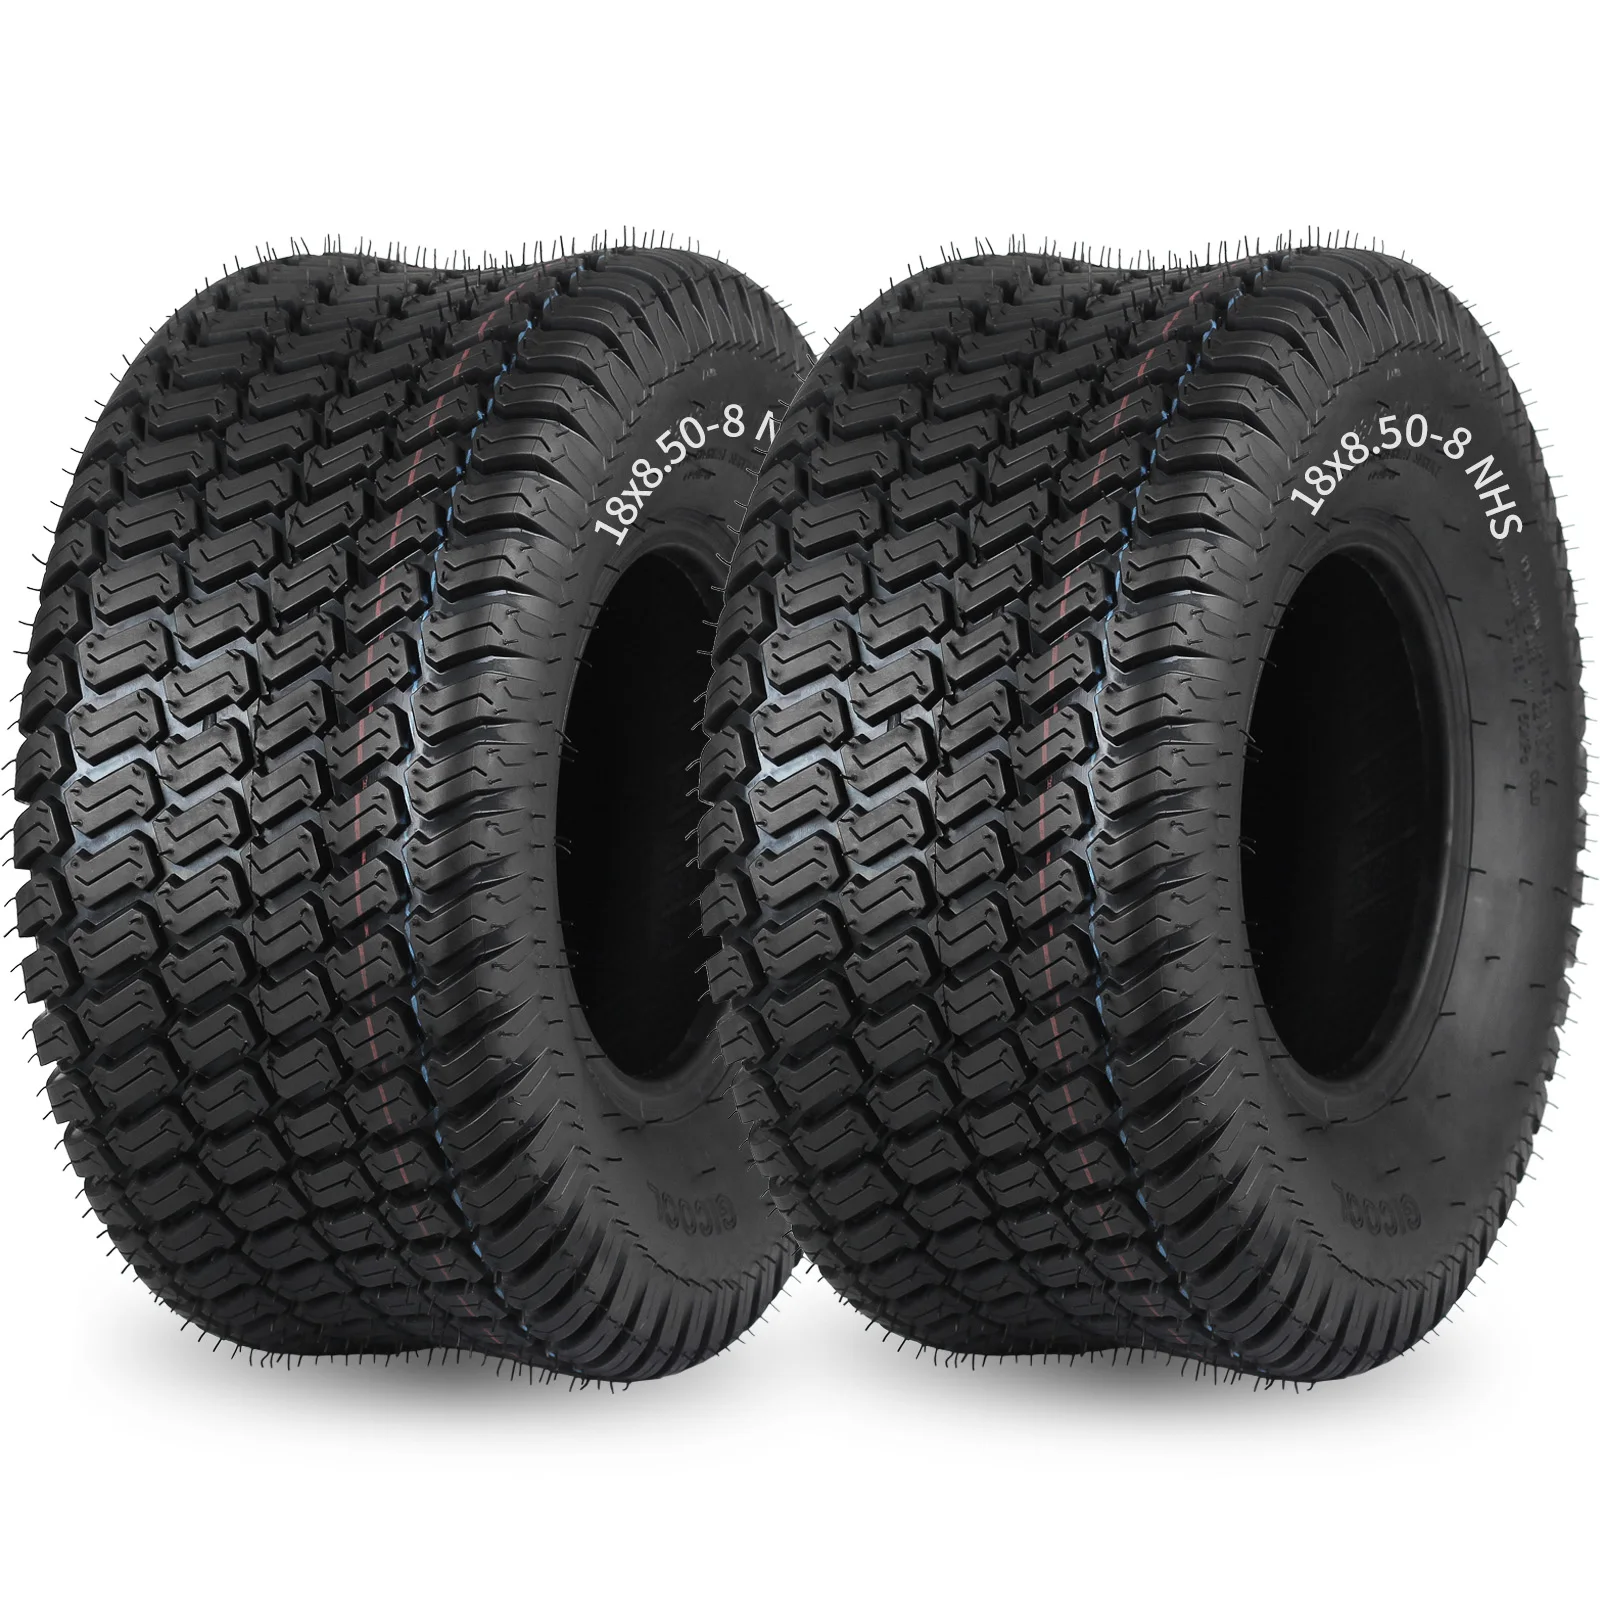 18 x 8.50-8 Turf-S Pattern Lawn Mower Tubeless Tire, 18x8.5-8 for Tractor Riding Lawnmowers